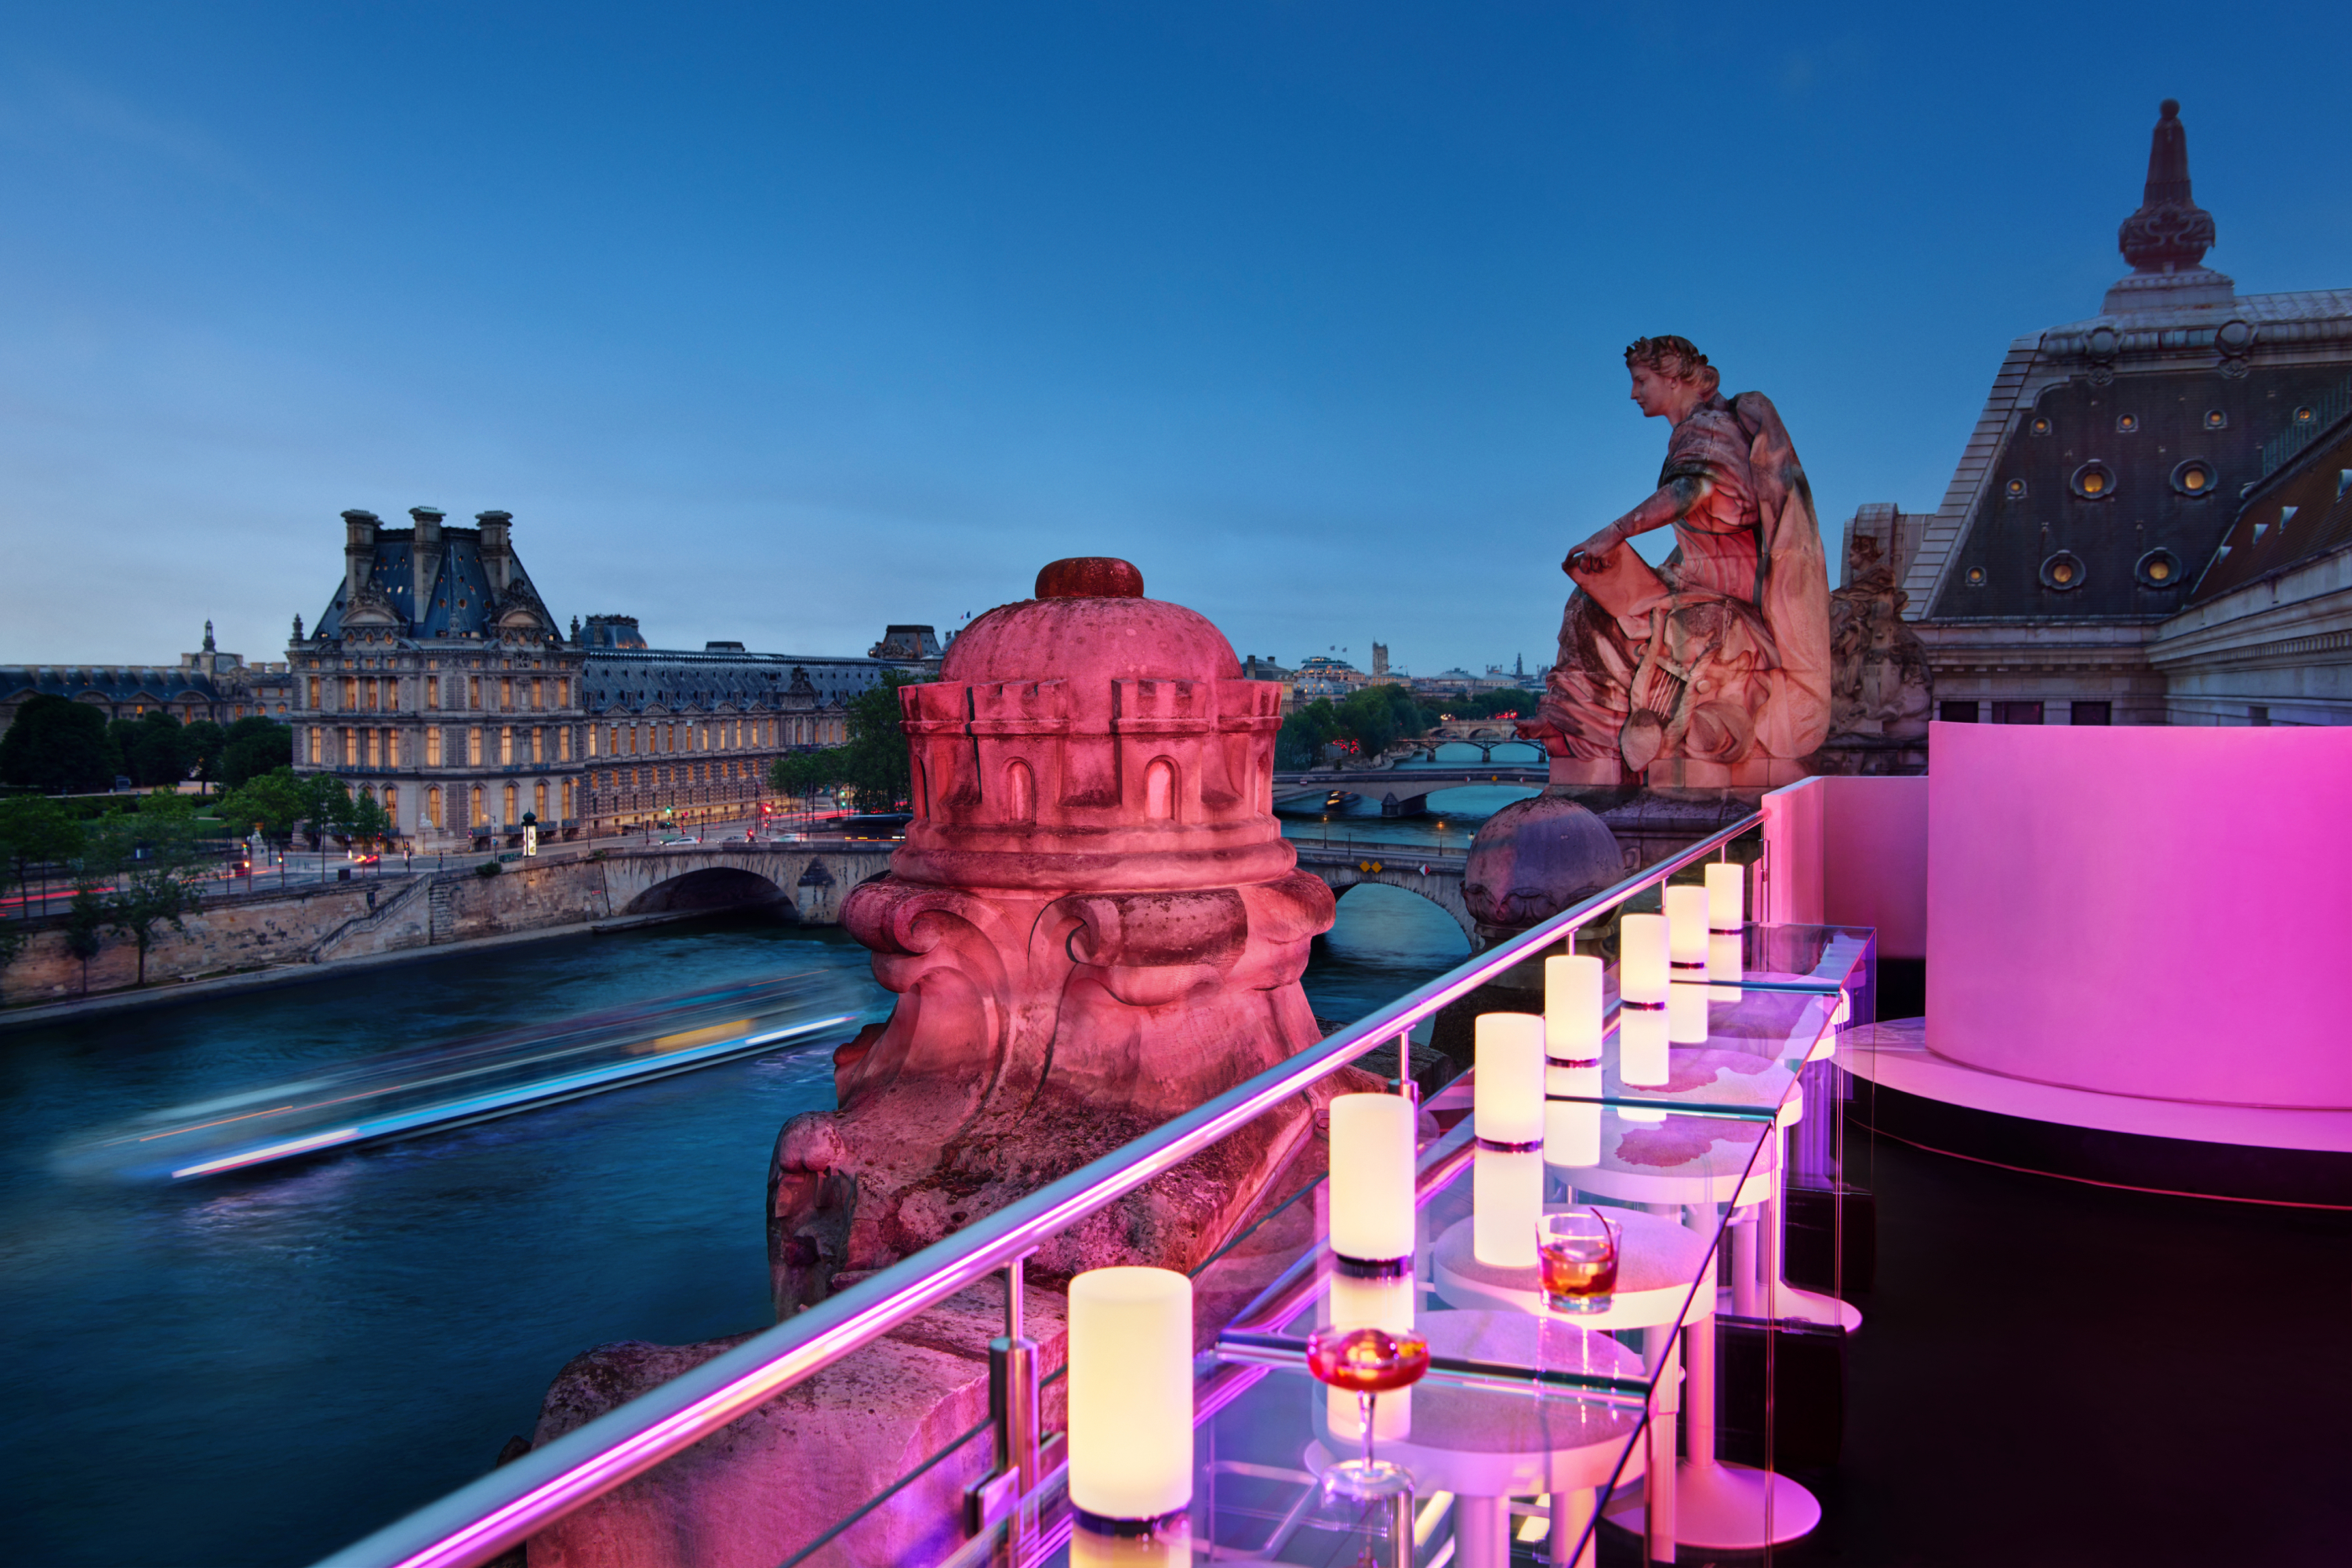 View from the terrace to the River Seine, with the specially installed high tables and stools in the foreground.